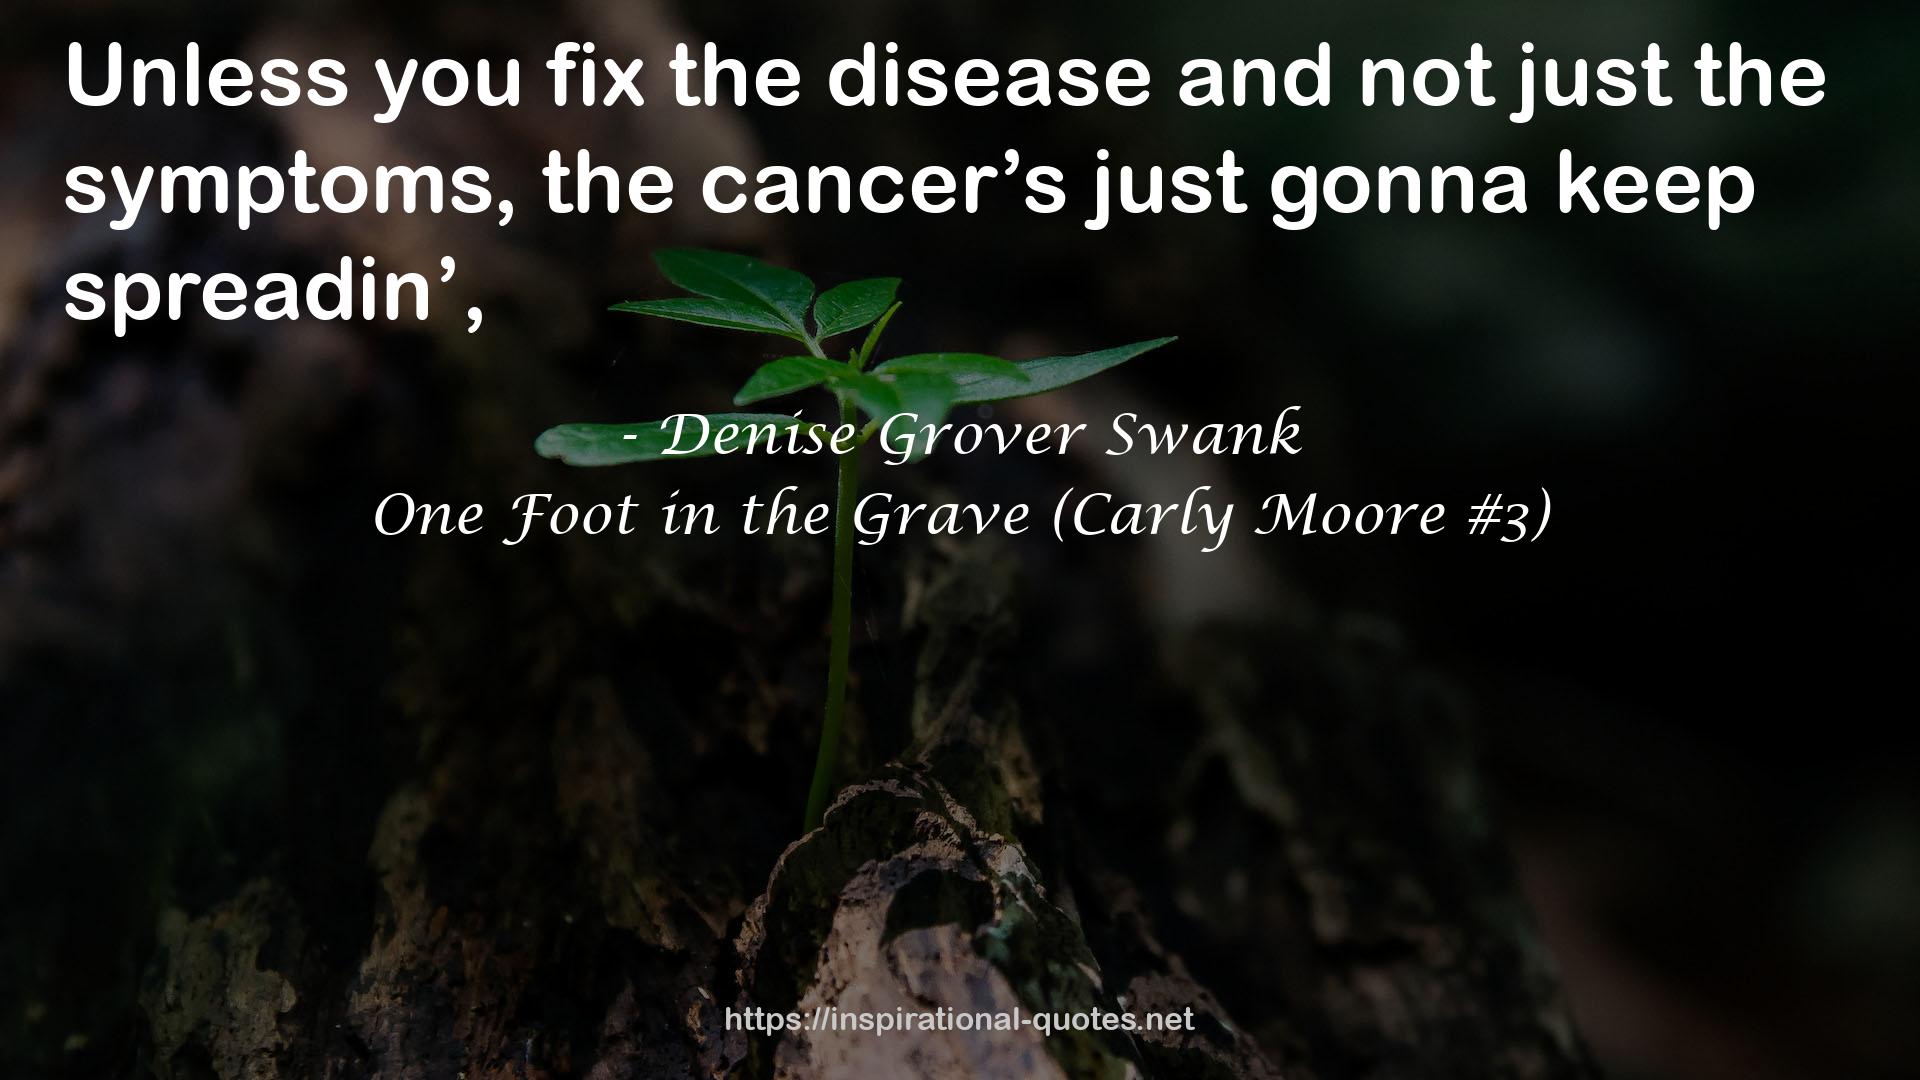 One Foot in the Grave (Carly Moore #3) QUOTES